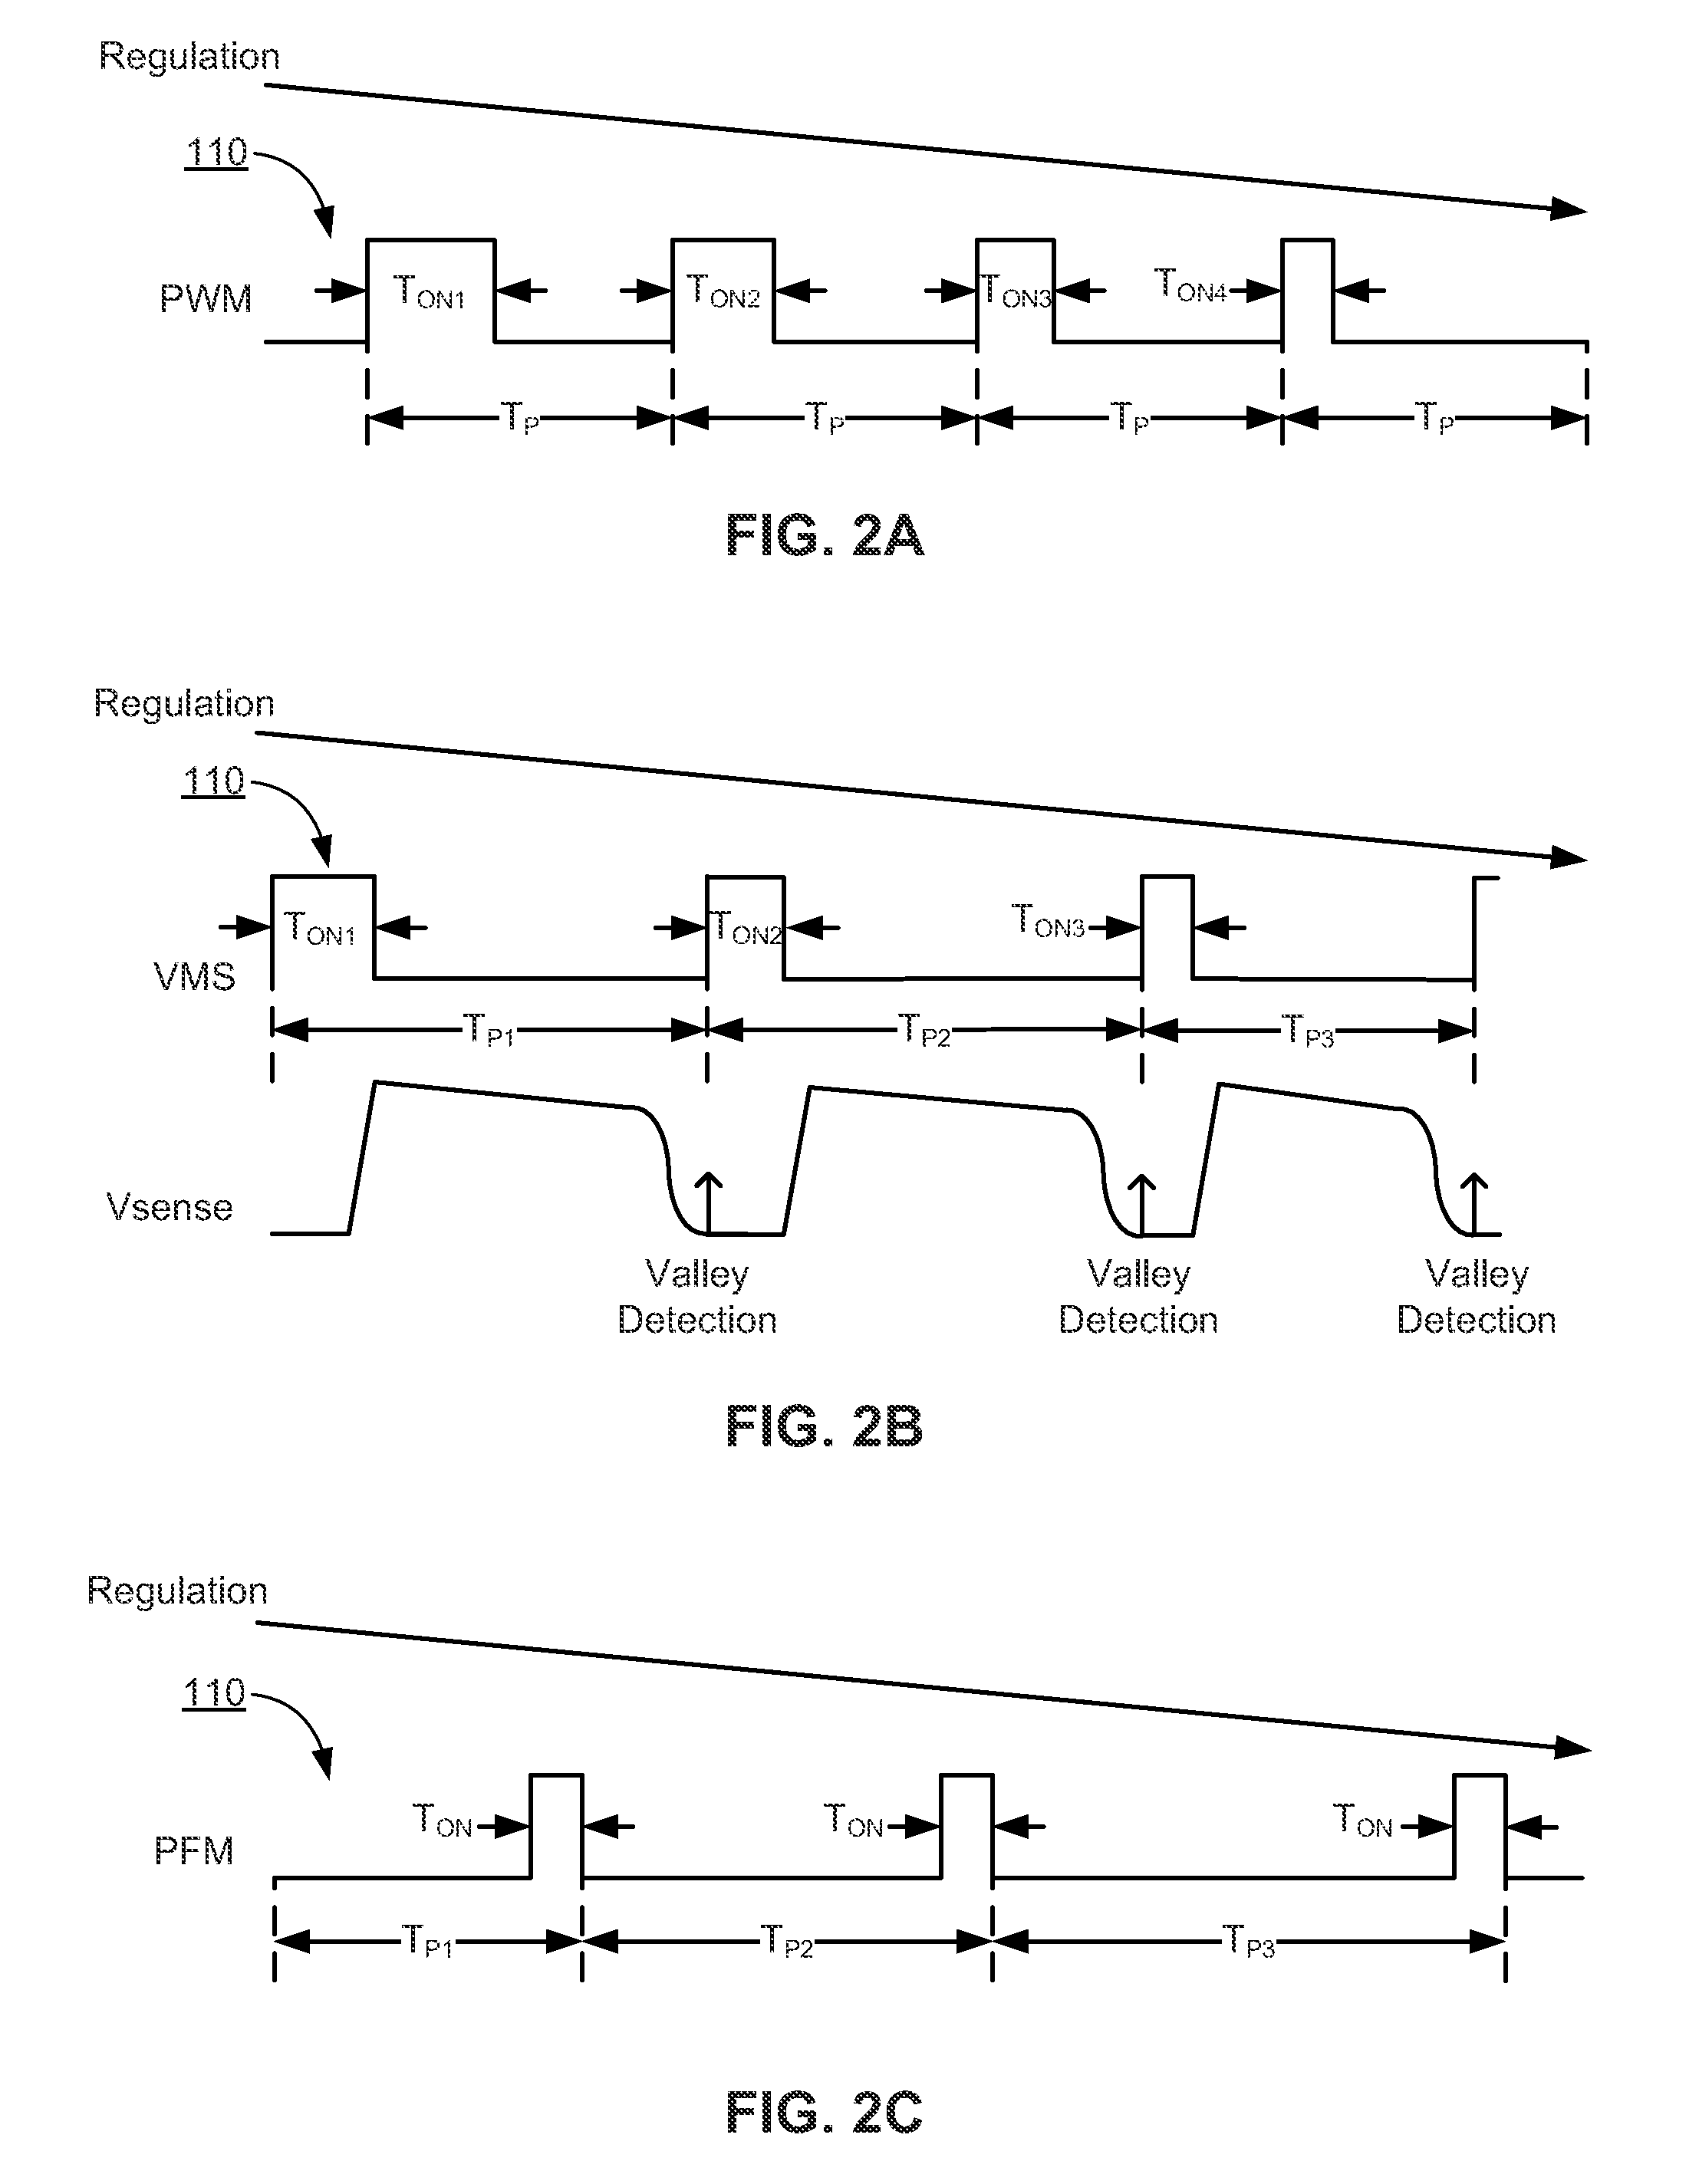 Regulation for power supply mode transition to low-load operation